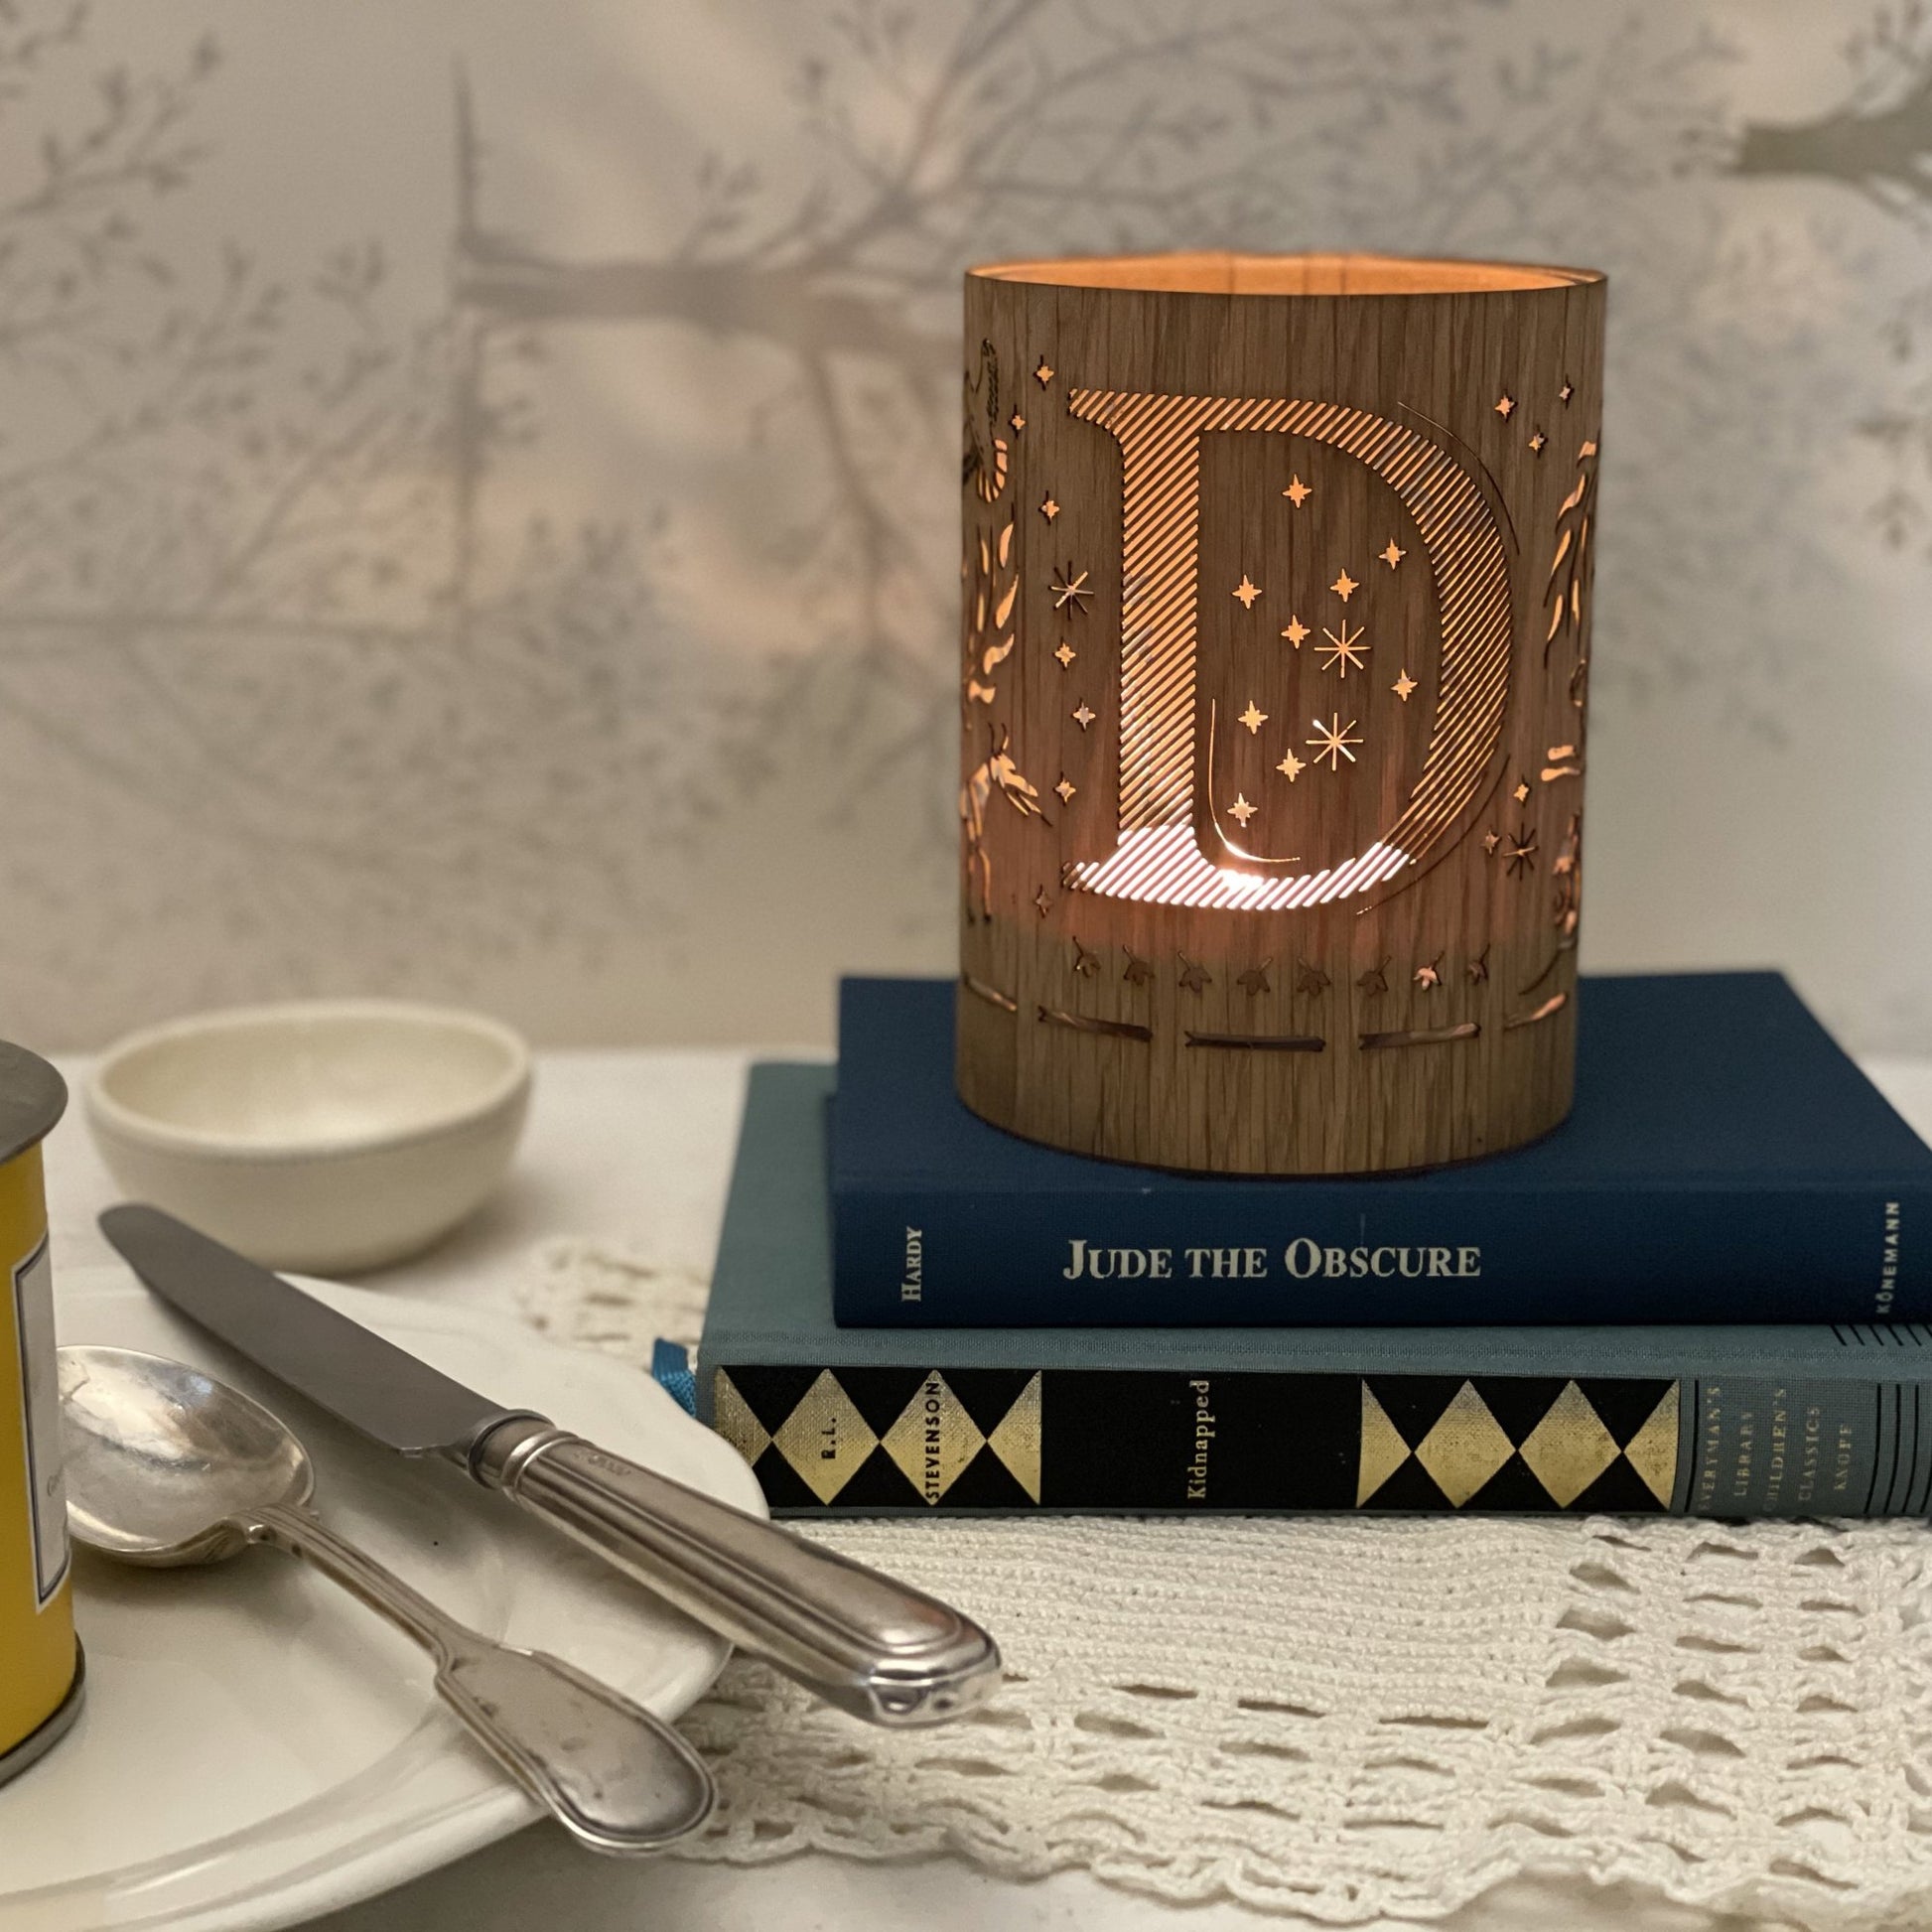 Letter D Monogram Lantern - made from glass and oak or maple